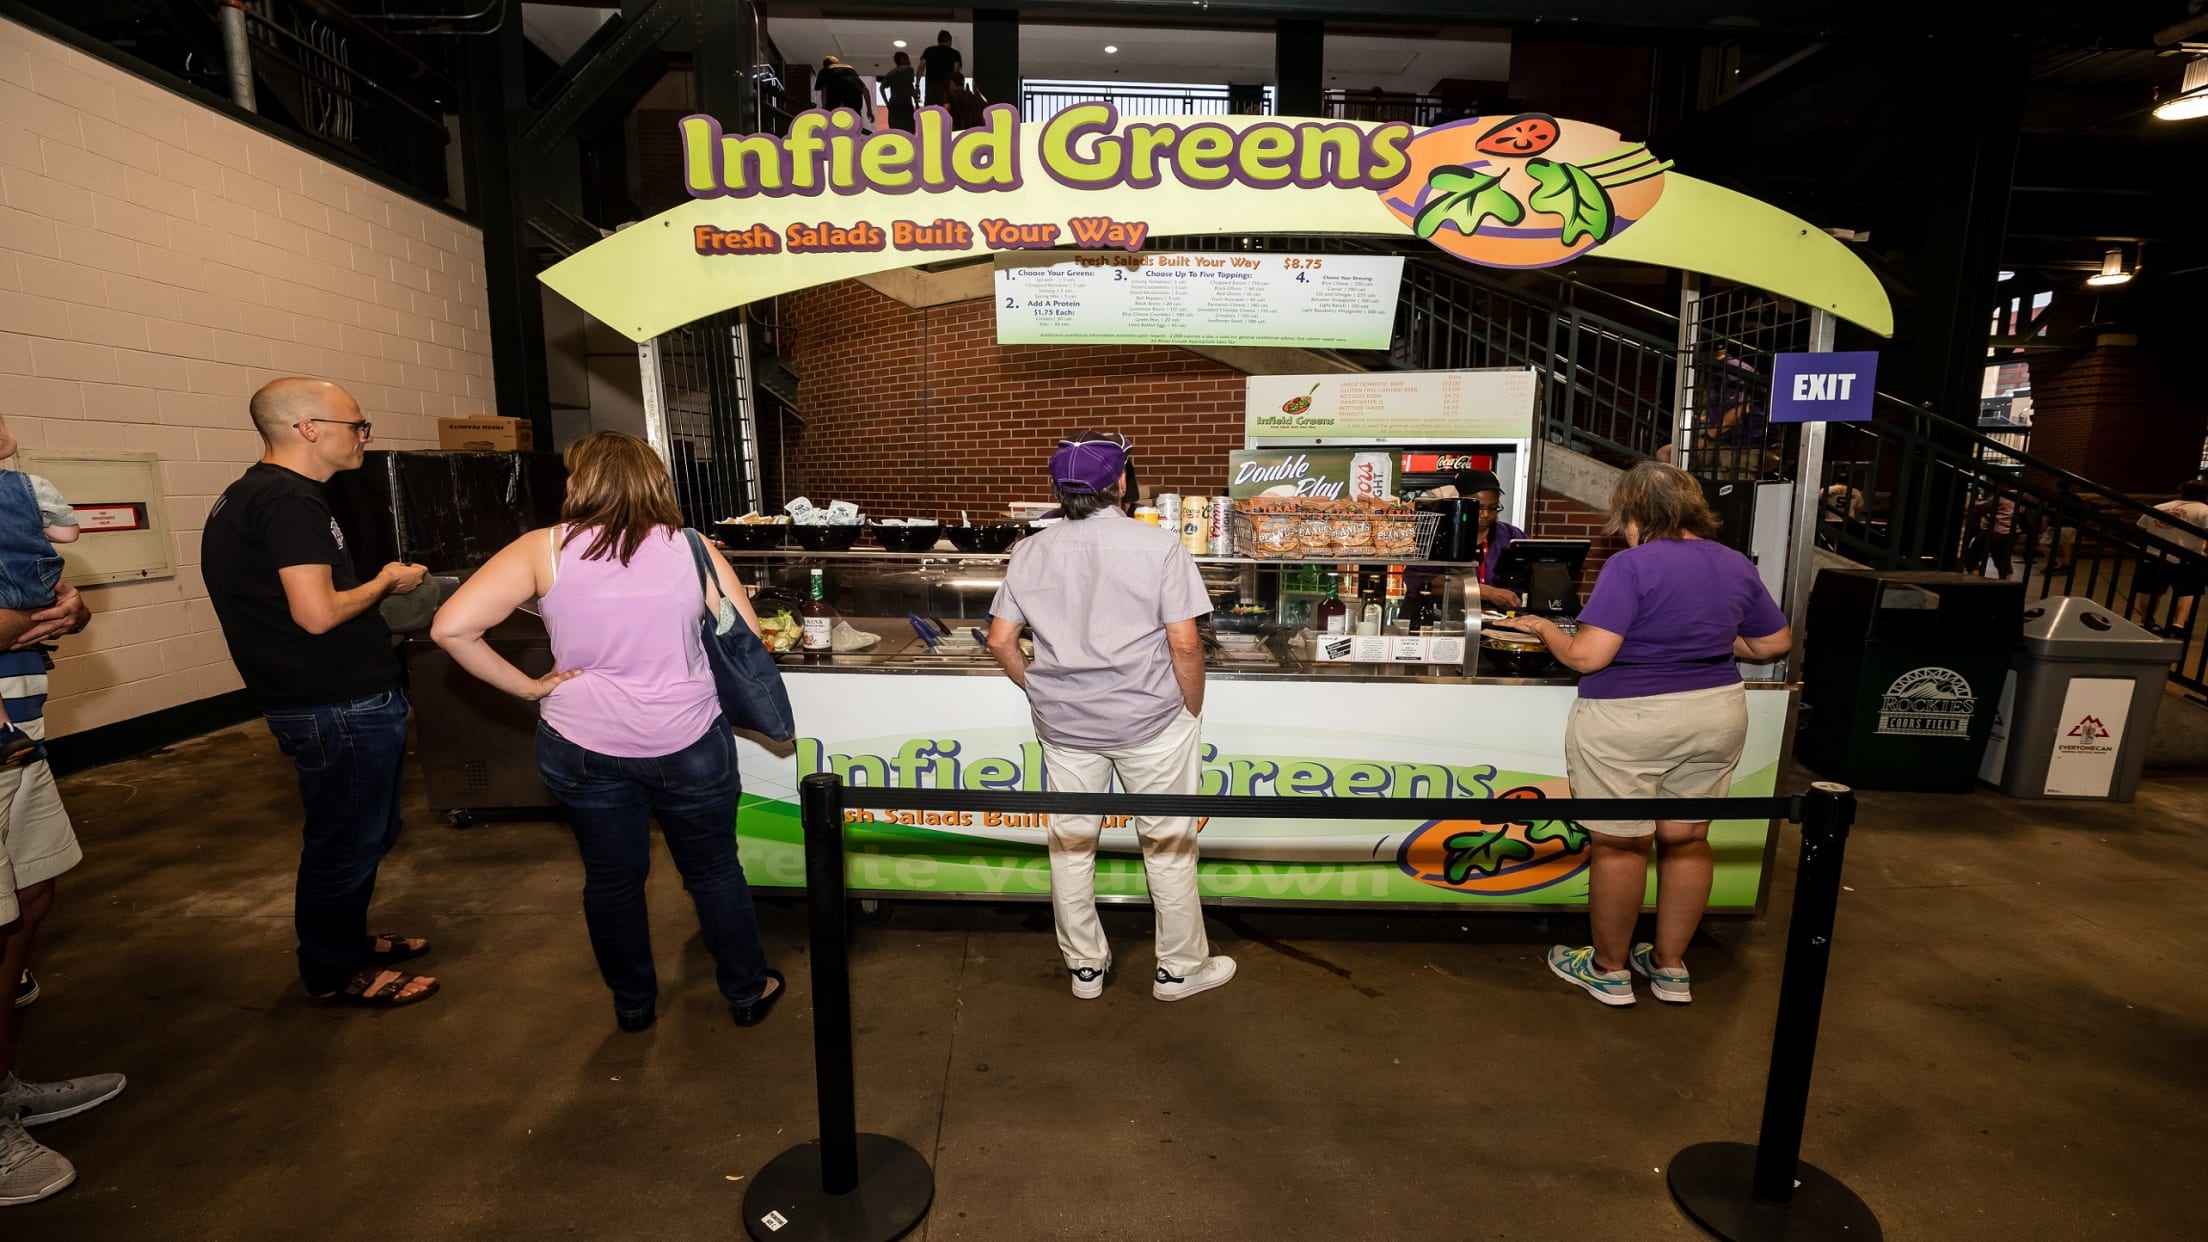 What's new to eat at Coors Field this season - Axios Denver